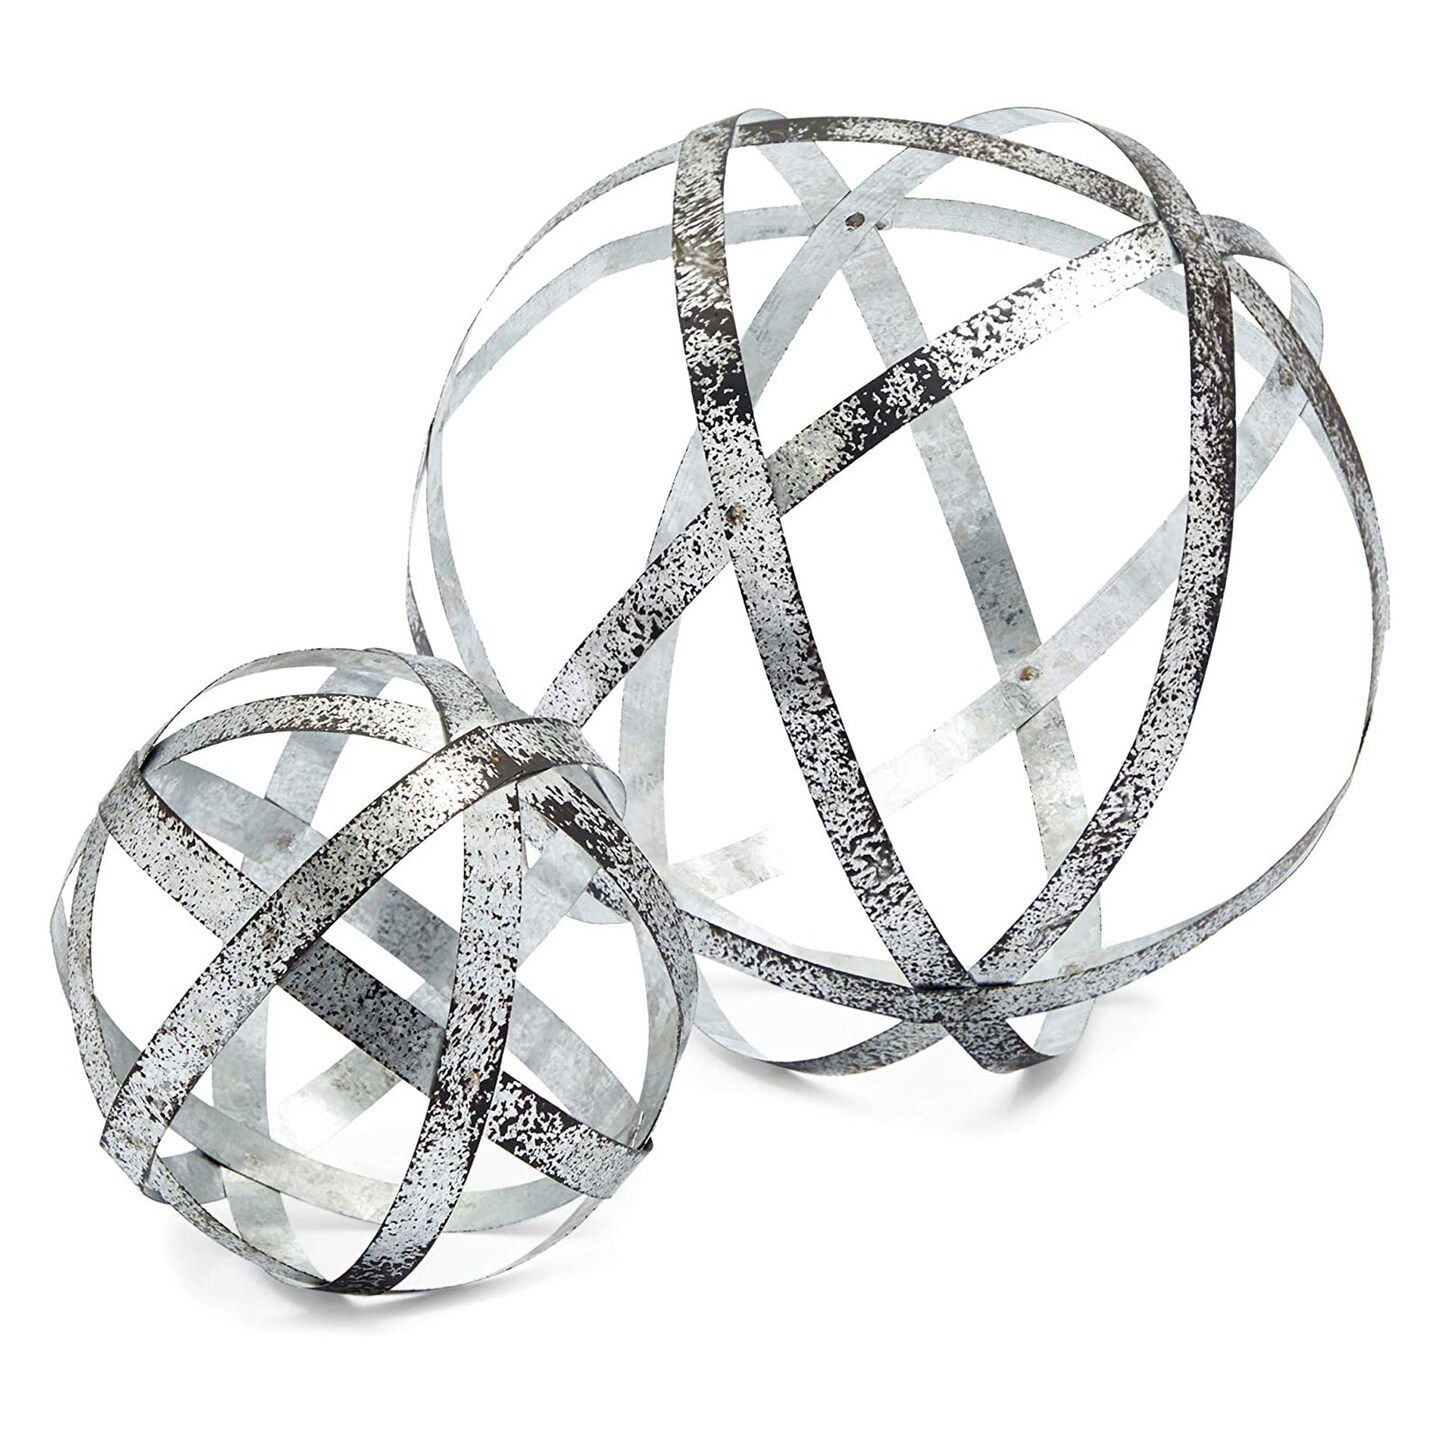 2 Piece Silver Metal Decorative Spheres for Home Decor, Table, Rustic Style Shelf Decor Accents (2 Sizes)